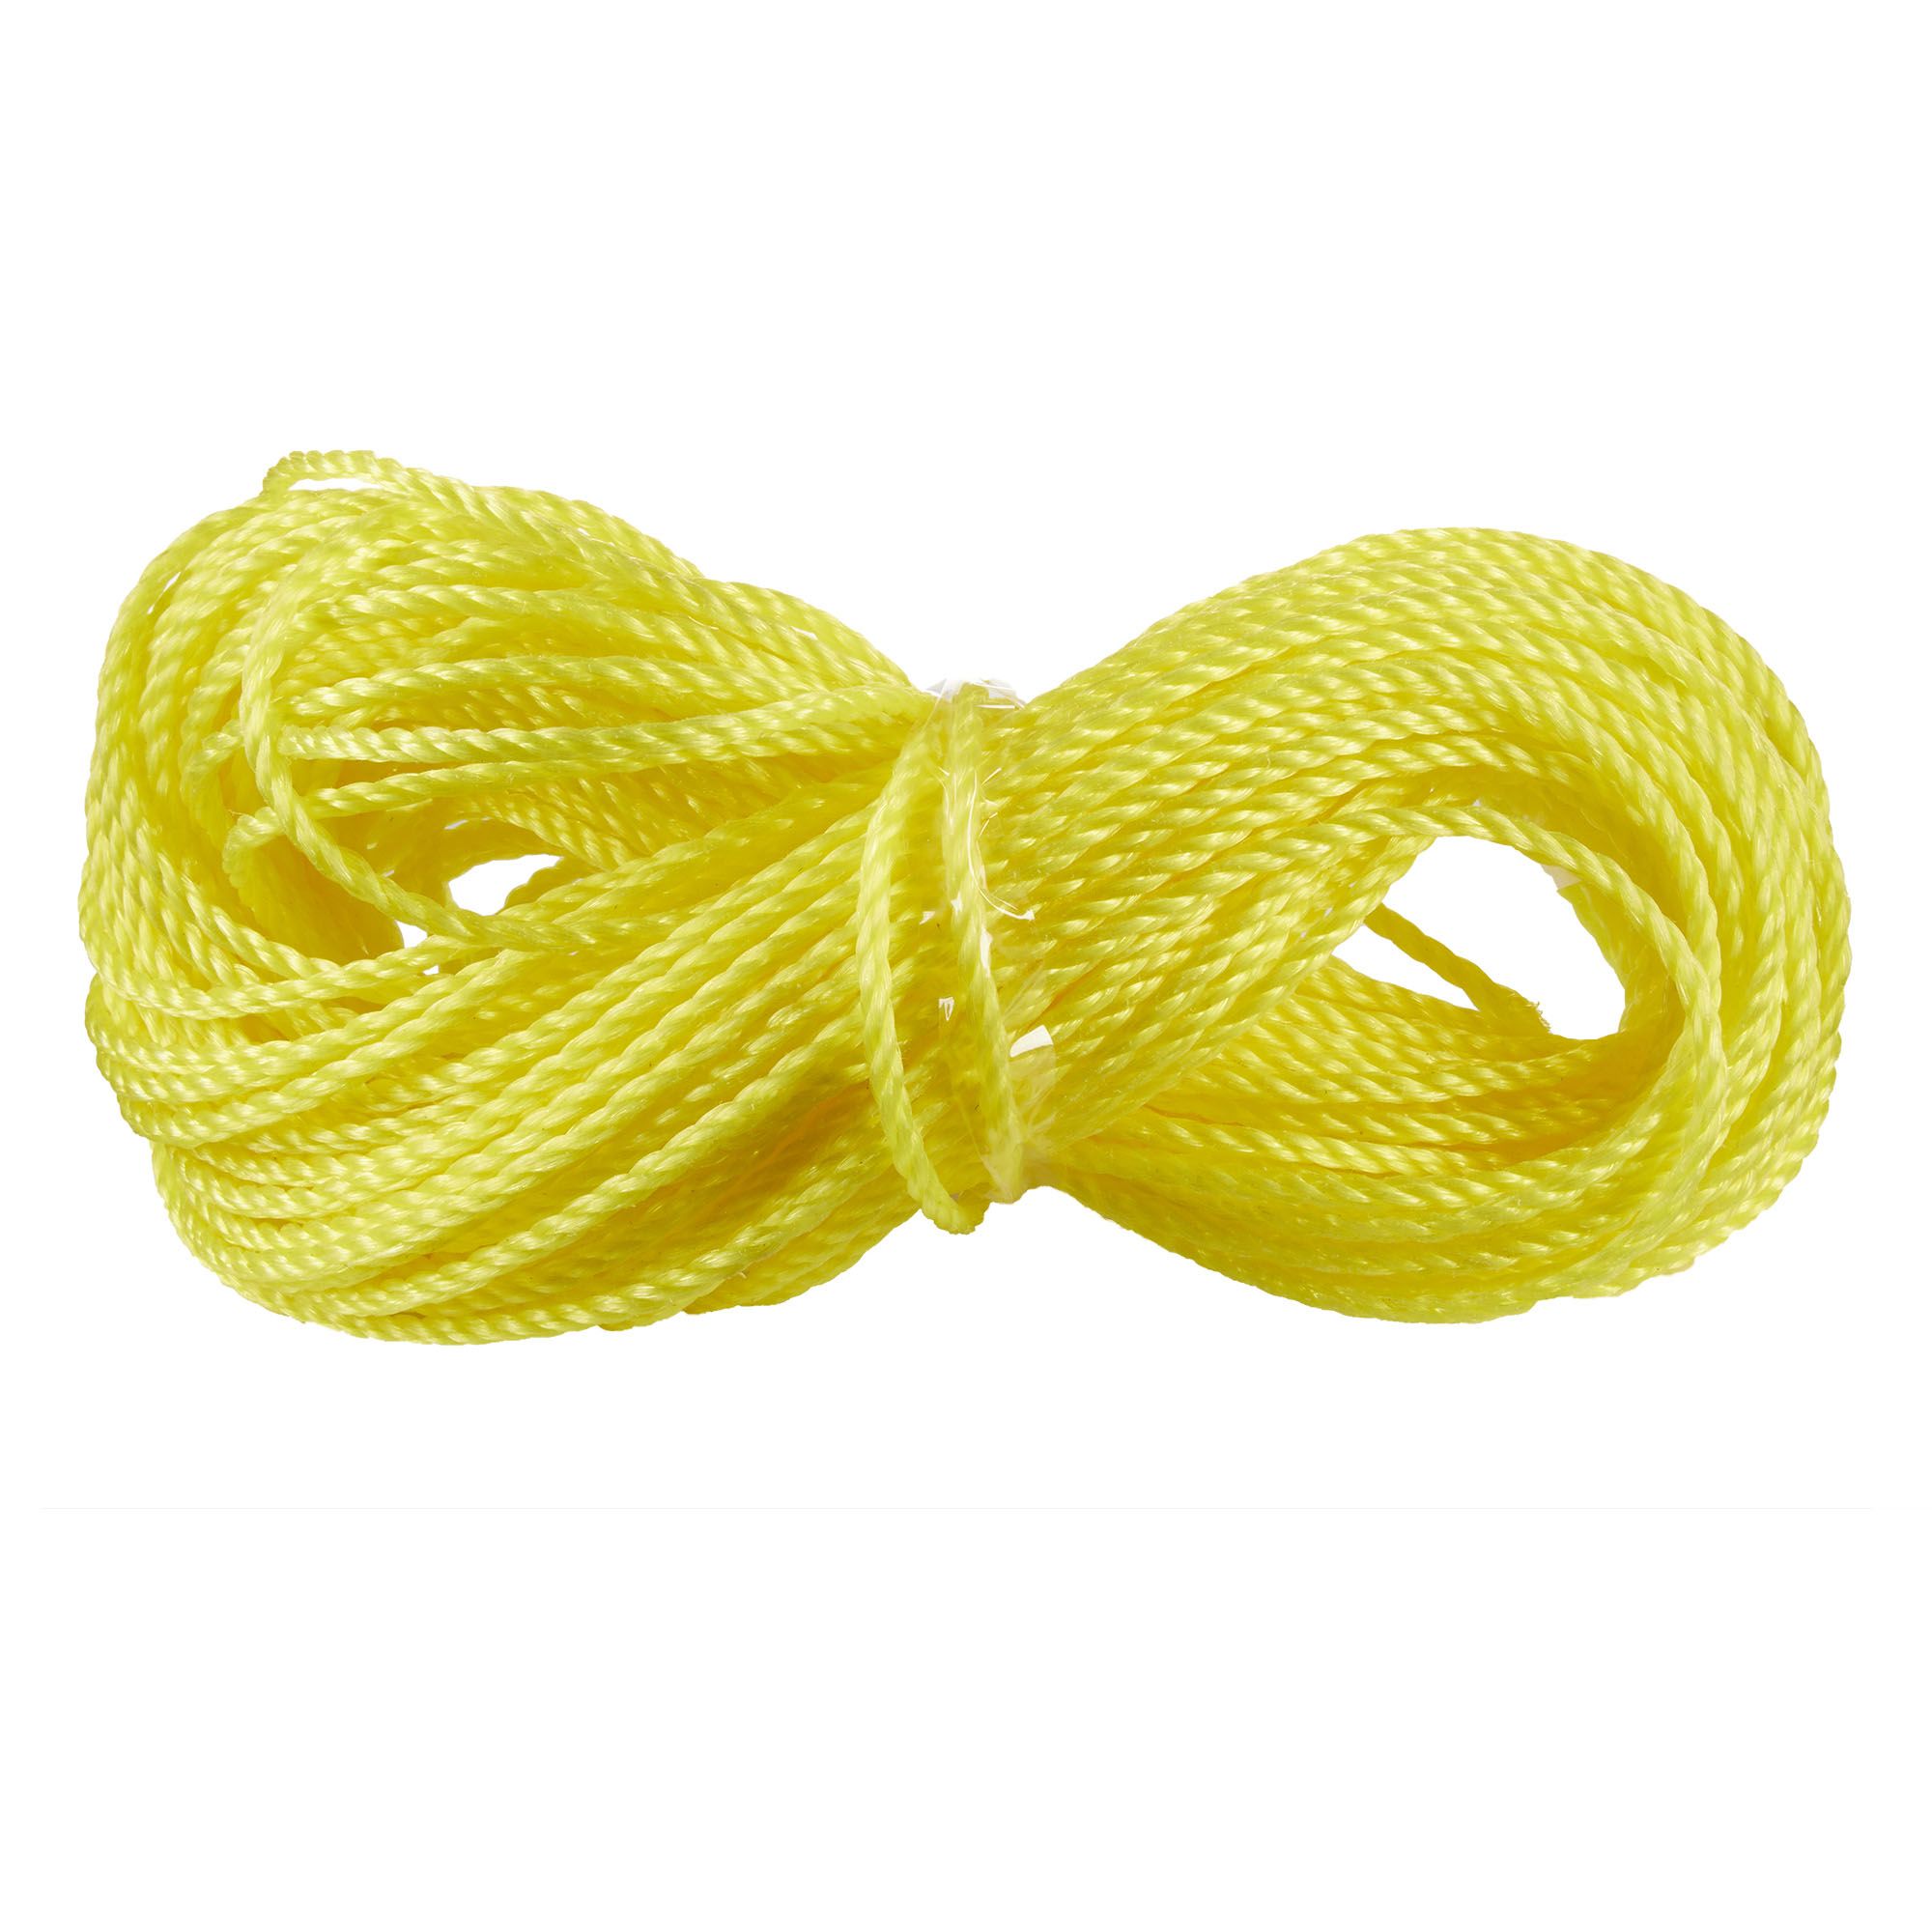 100 feet of yellow rope, Trevi